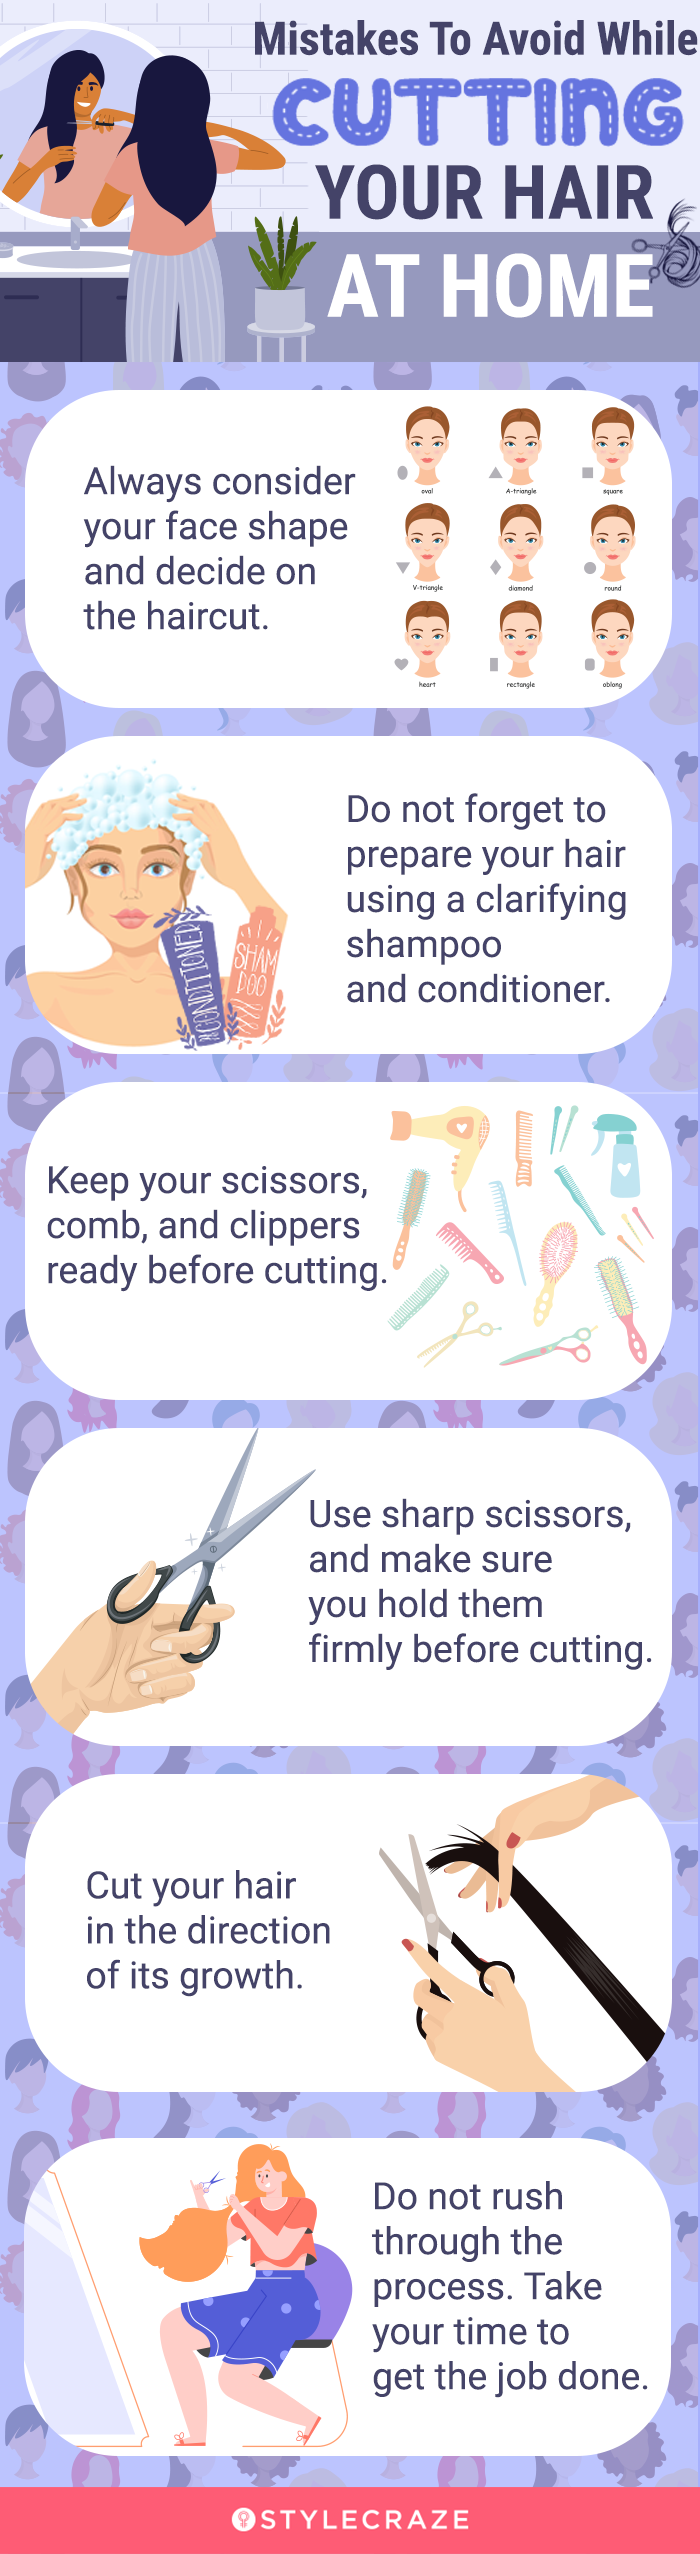 mistakes to avoid while cutting your hair at home (infographic)